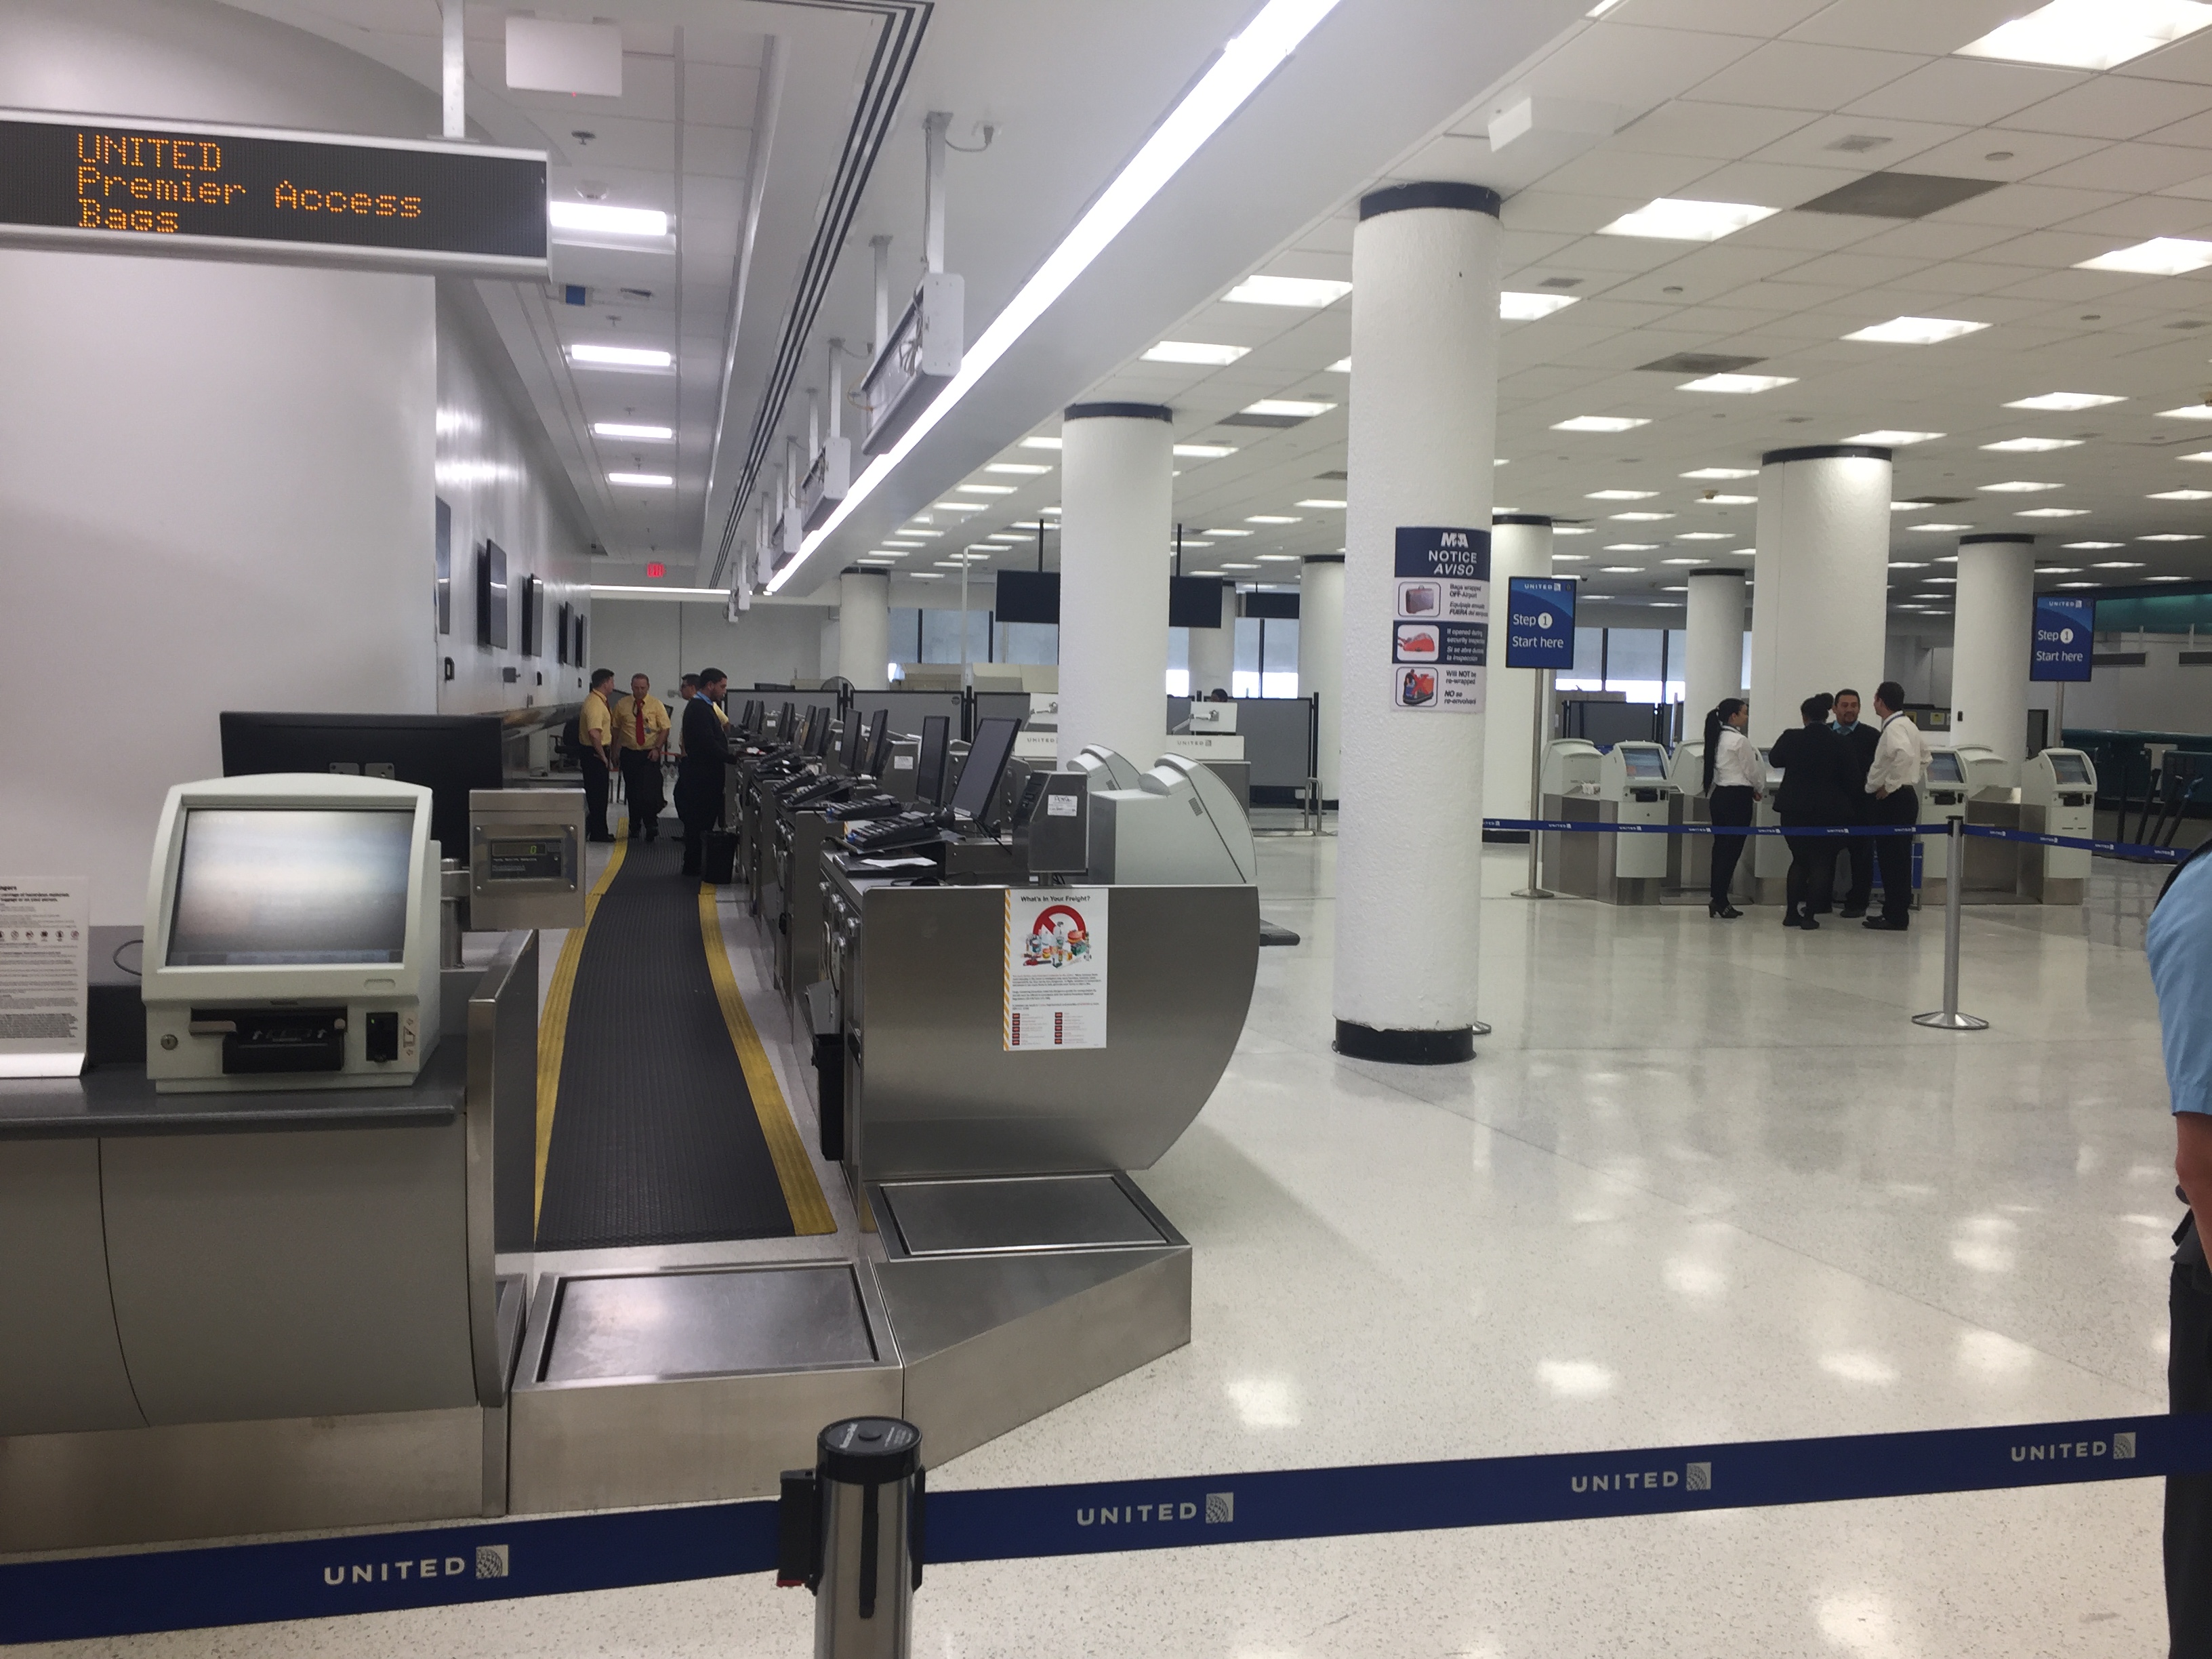 Concourses F & G Ticket Counter Upgrades